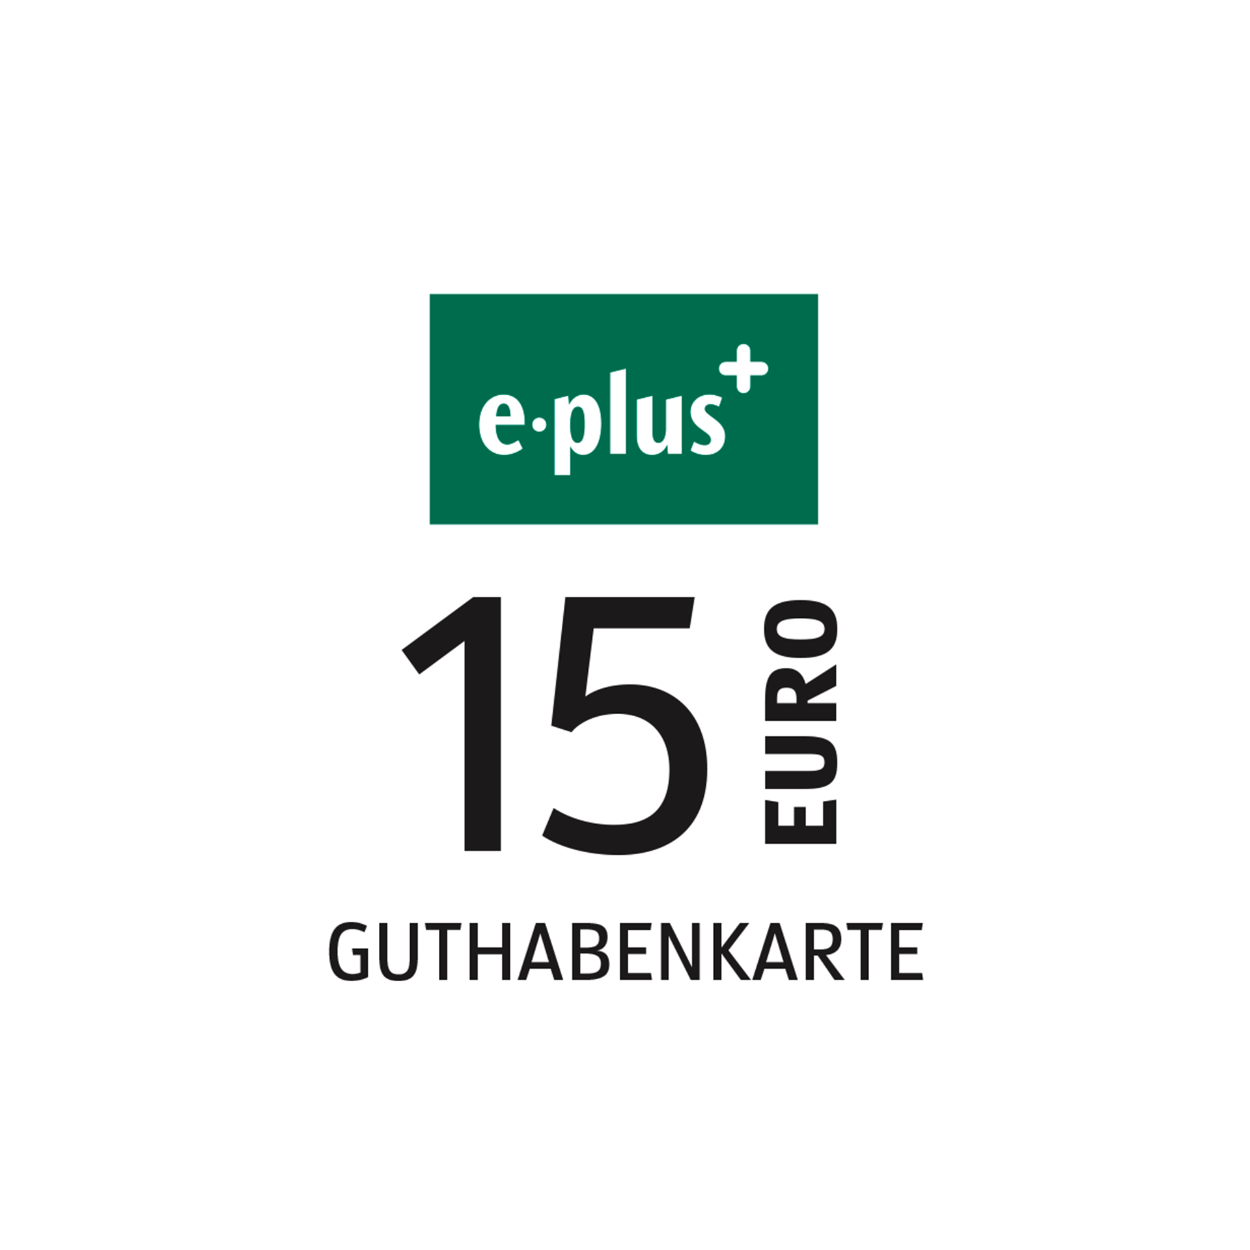 https://www.aldi-nord.de/content/dam/aldi/germany/produkte/guthabenkarte/8950_65x90mm_eplus_15E-1_ON.png/_jcr_content/renditions/opt.1250w.png.res/1530026216893/opt.1250w.png